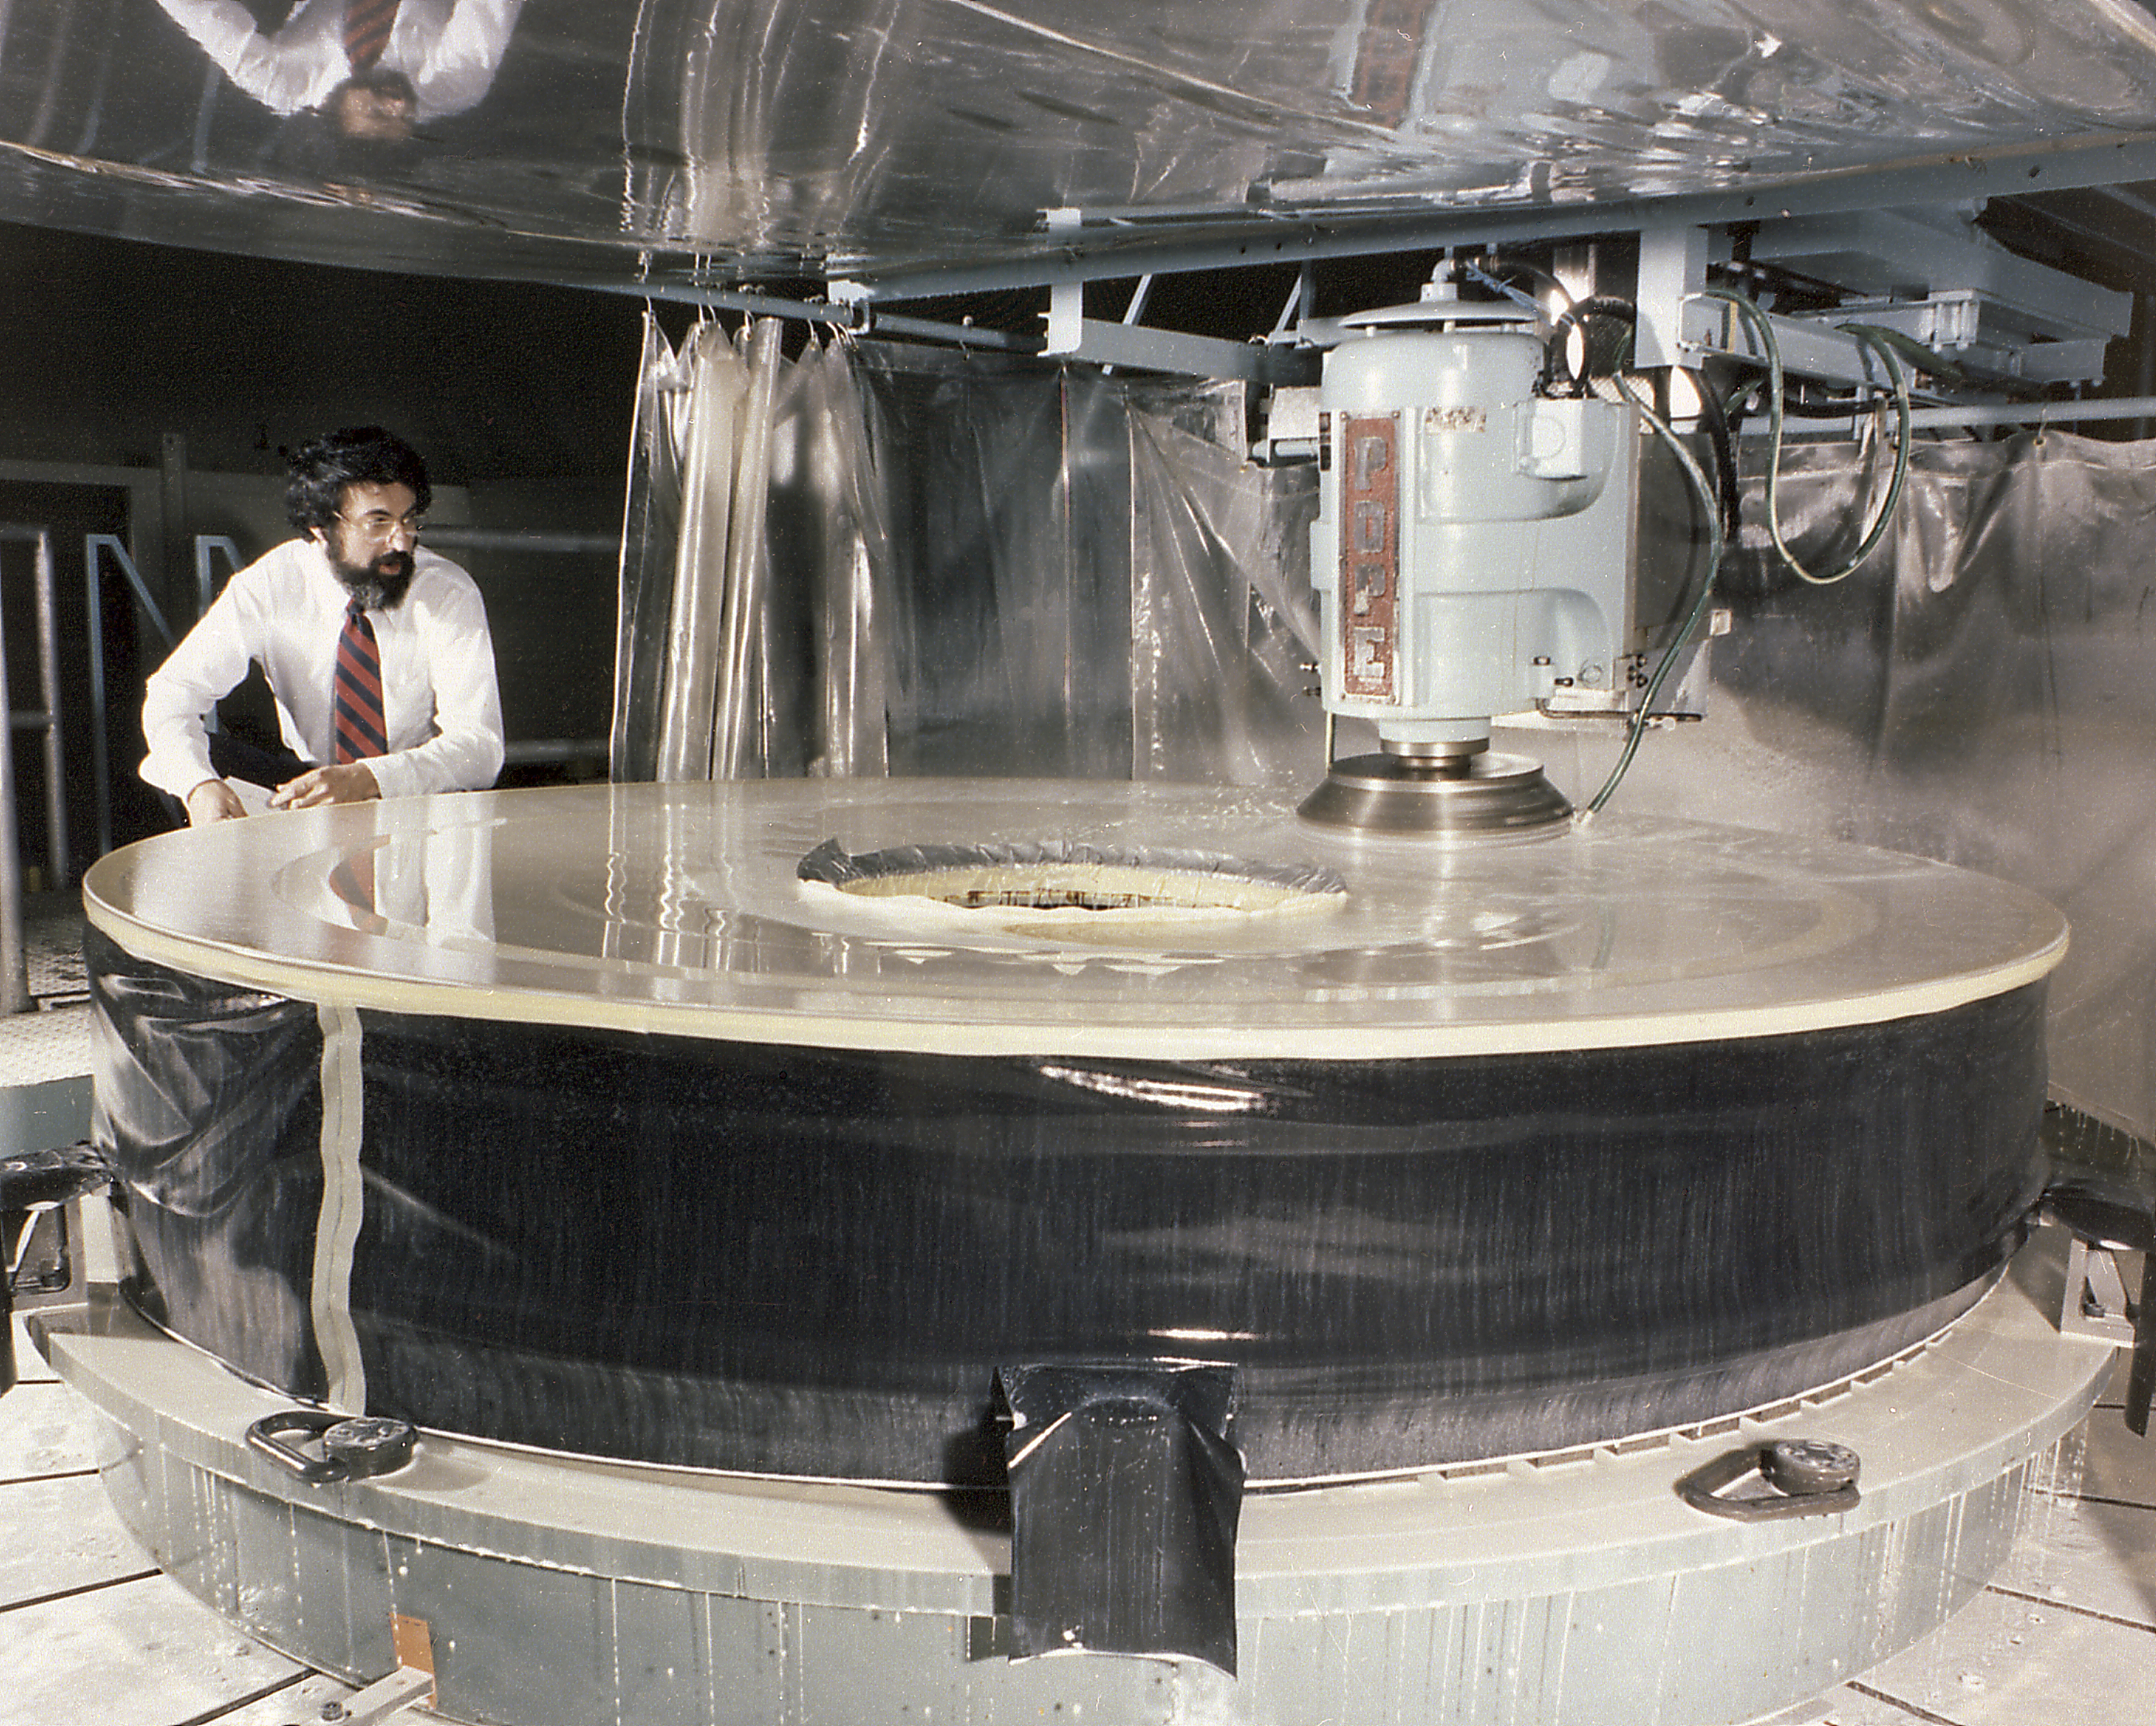 A machine is grinding the primary mirror of Hubble while a person looks on.